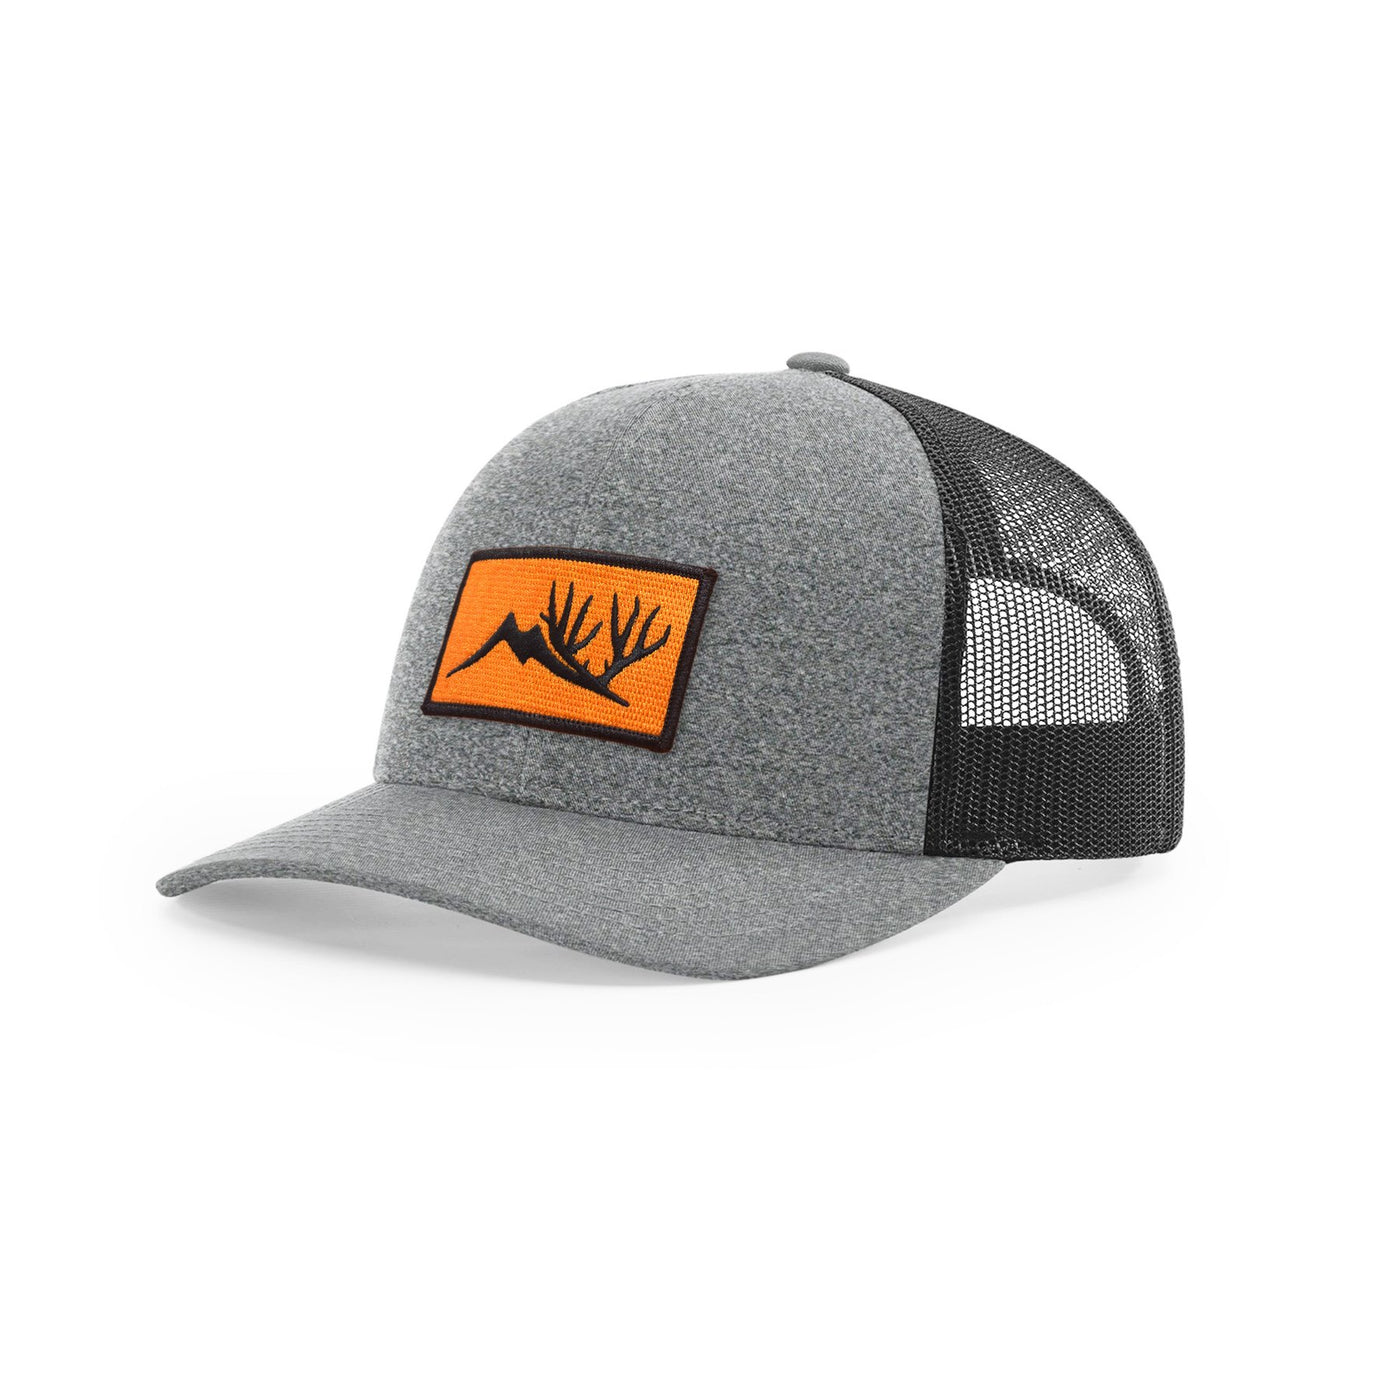 Gray ball cap with black netting and orange altitude patch on forehead